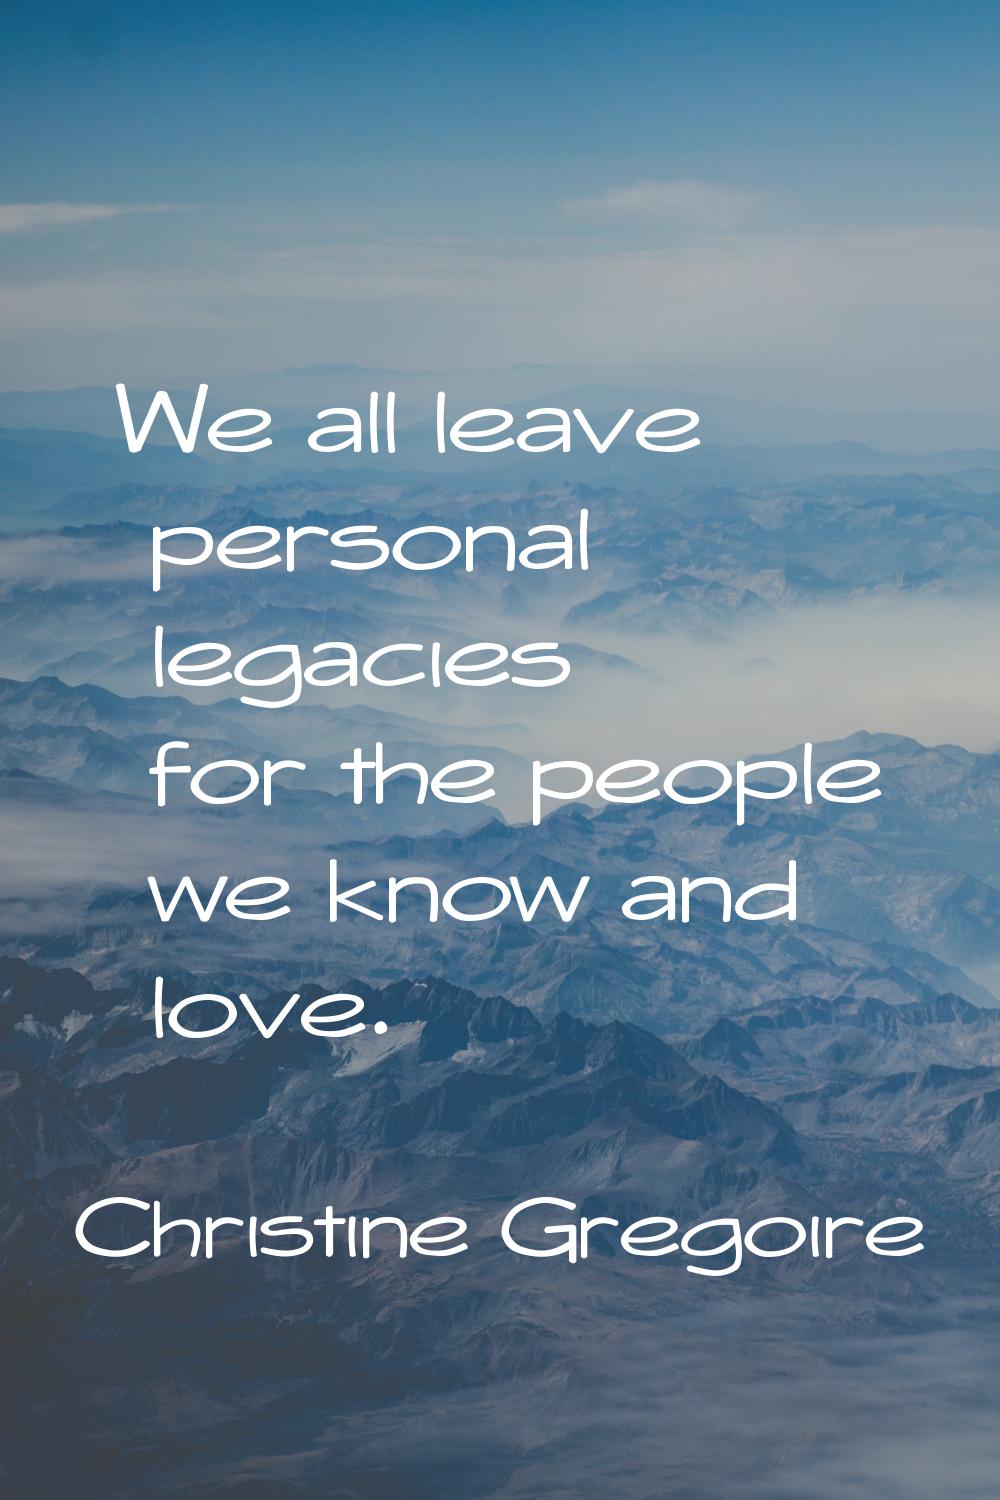 We all leave personal legacies for the people we know and love.